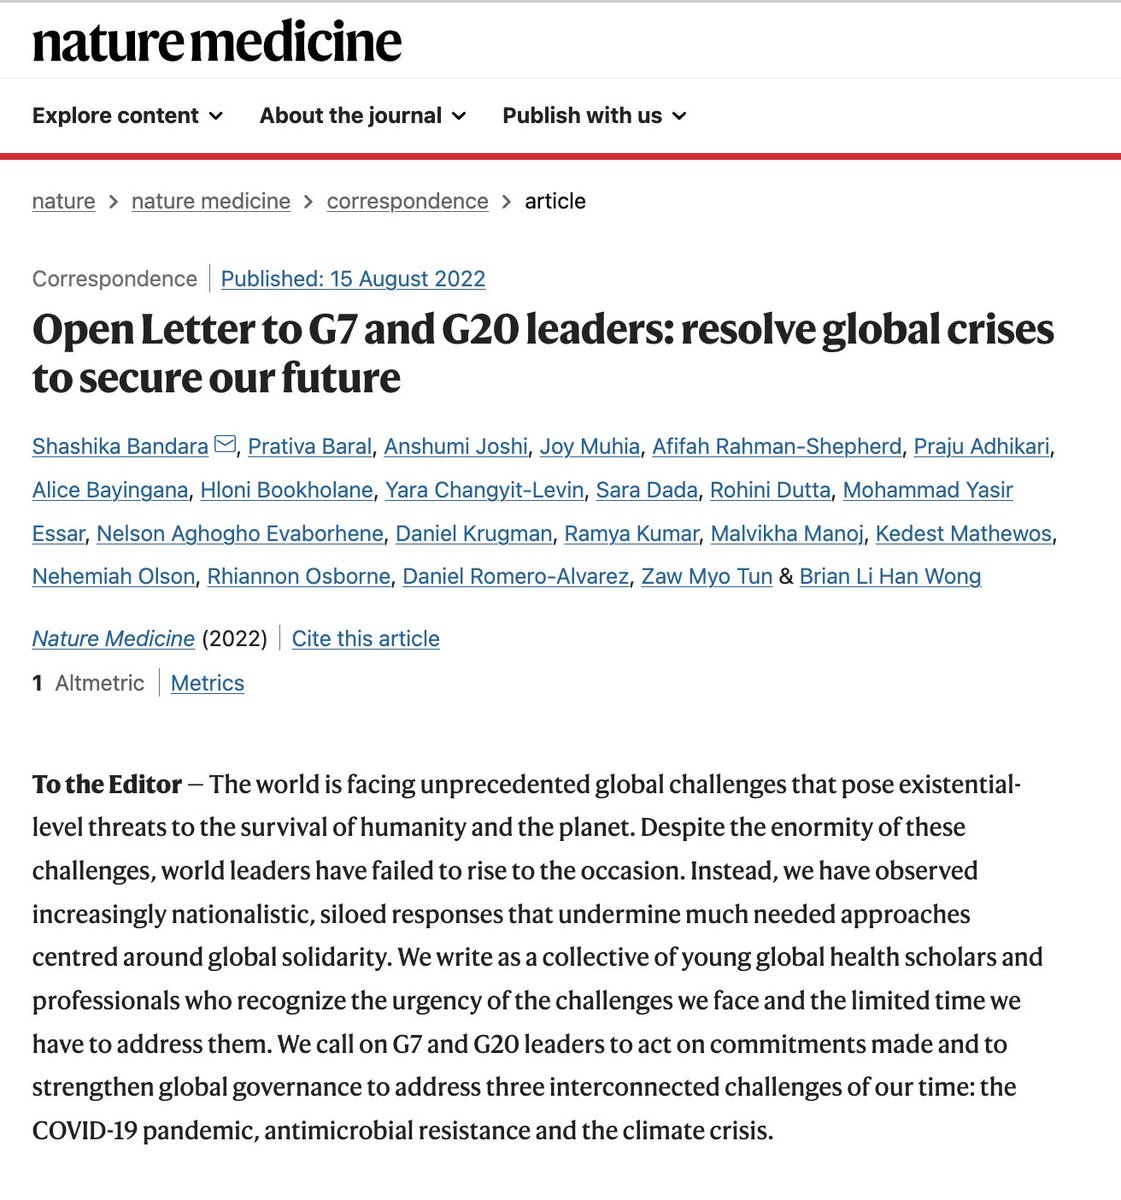 'As the next gen. of #globalhealth leaders, we will hold leaders of today accountable to their commitments & push for changes to our broken #globalhealthgovernance system.' Read our Open Letter to @G7 & @g20org Leaders published today in @NatureMedicine: nature.com/articles/s4159…